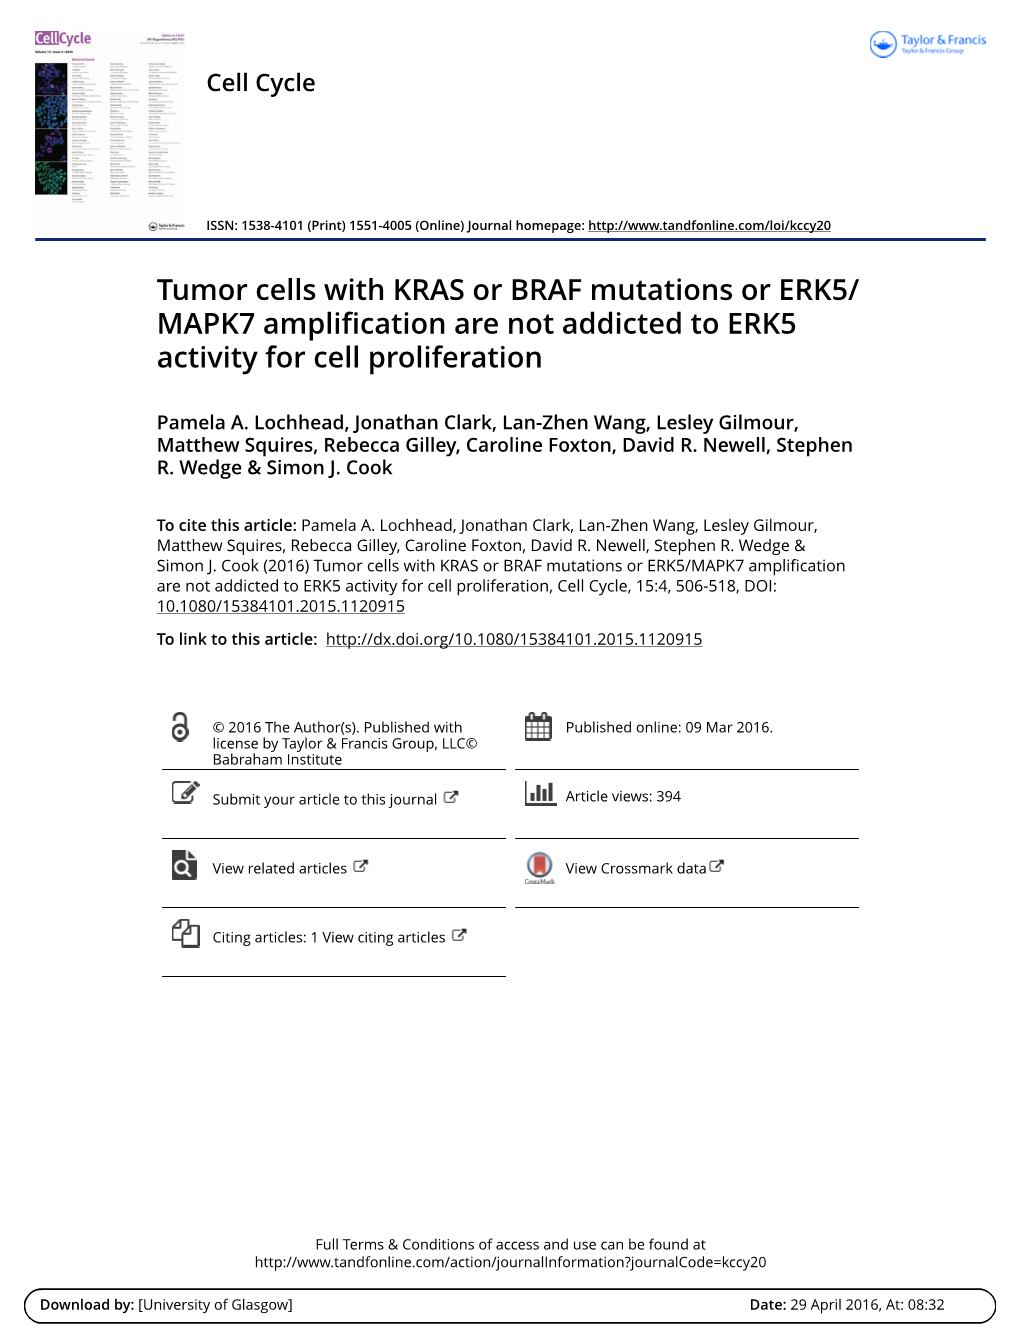 Tumor Cells with KRAS Or BRAF Mutations Or ERK5/ MAPK7 Amplification Are Not Addicted to ERK5 Activity for Cell Proliferation